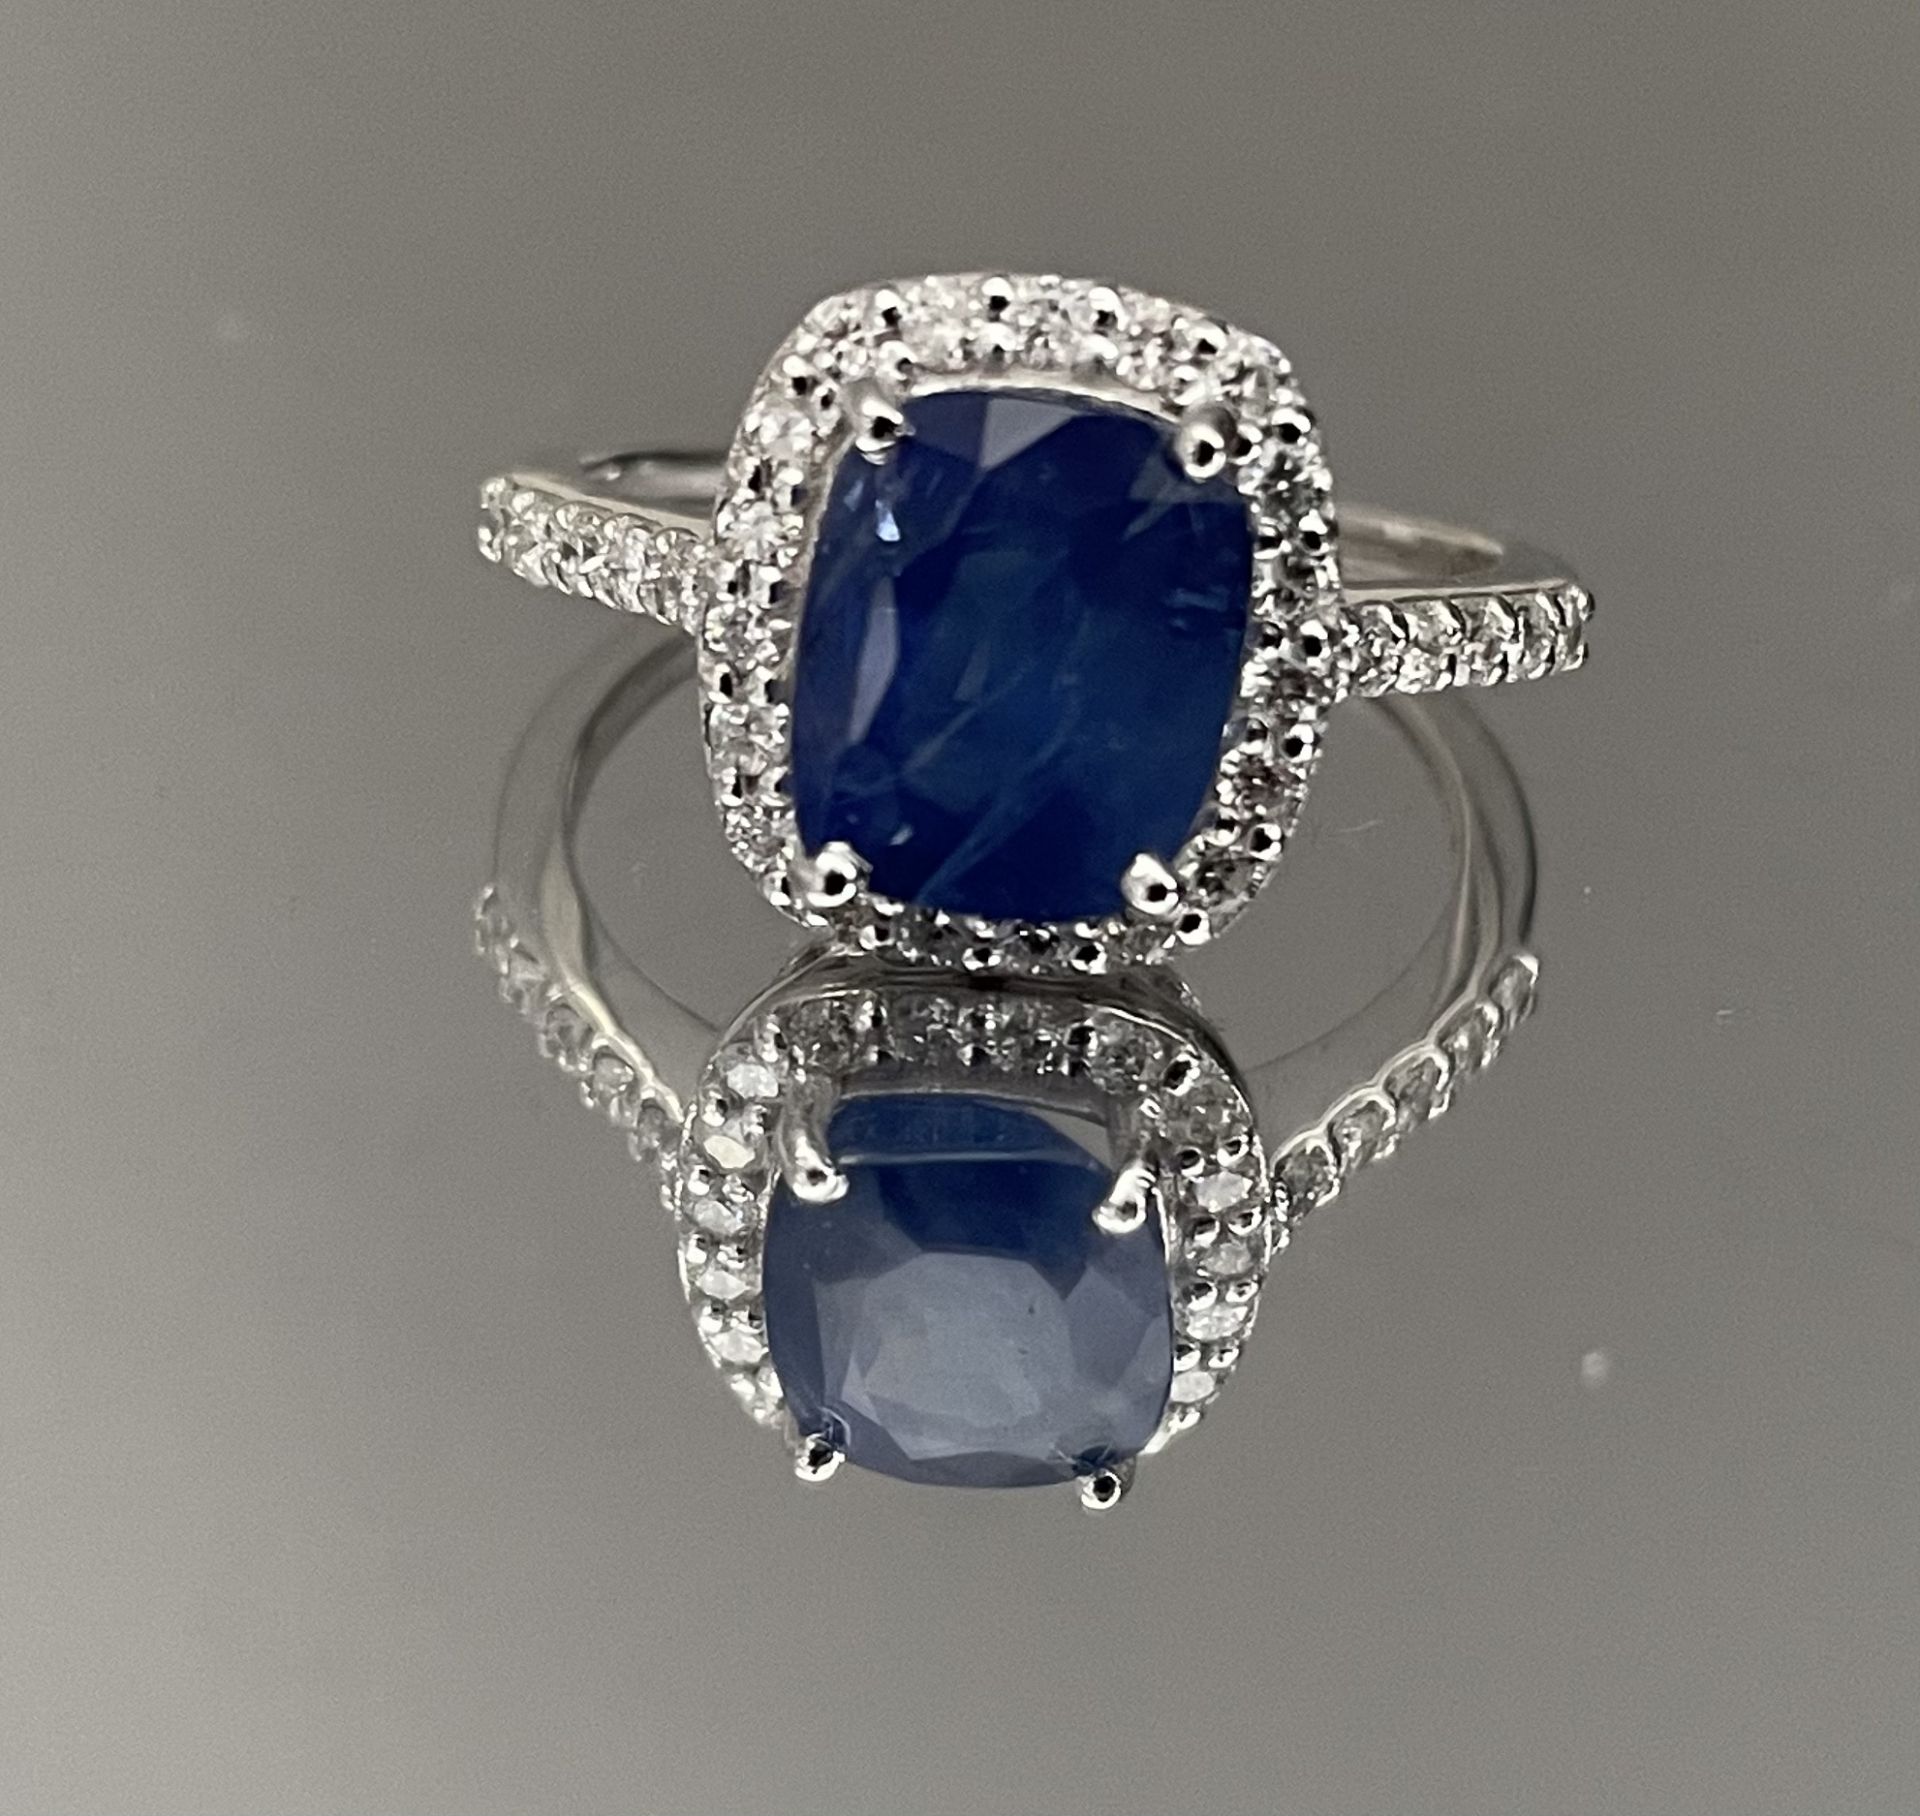 Beautiful Natural Ceylon Blue Sapphire With Natural Diamonds And 18k White Gold - Image 2 of 6